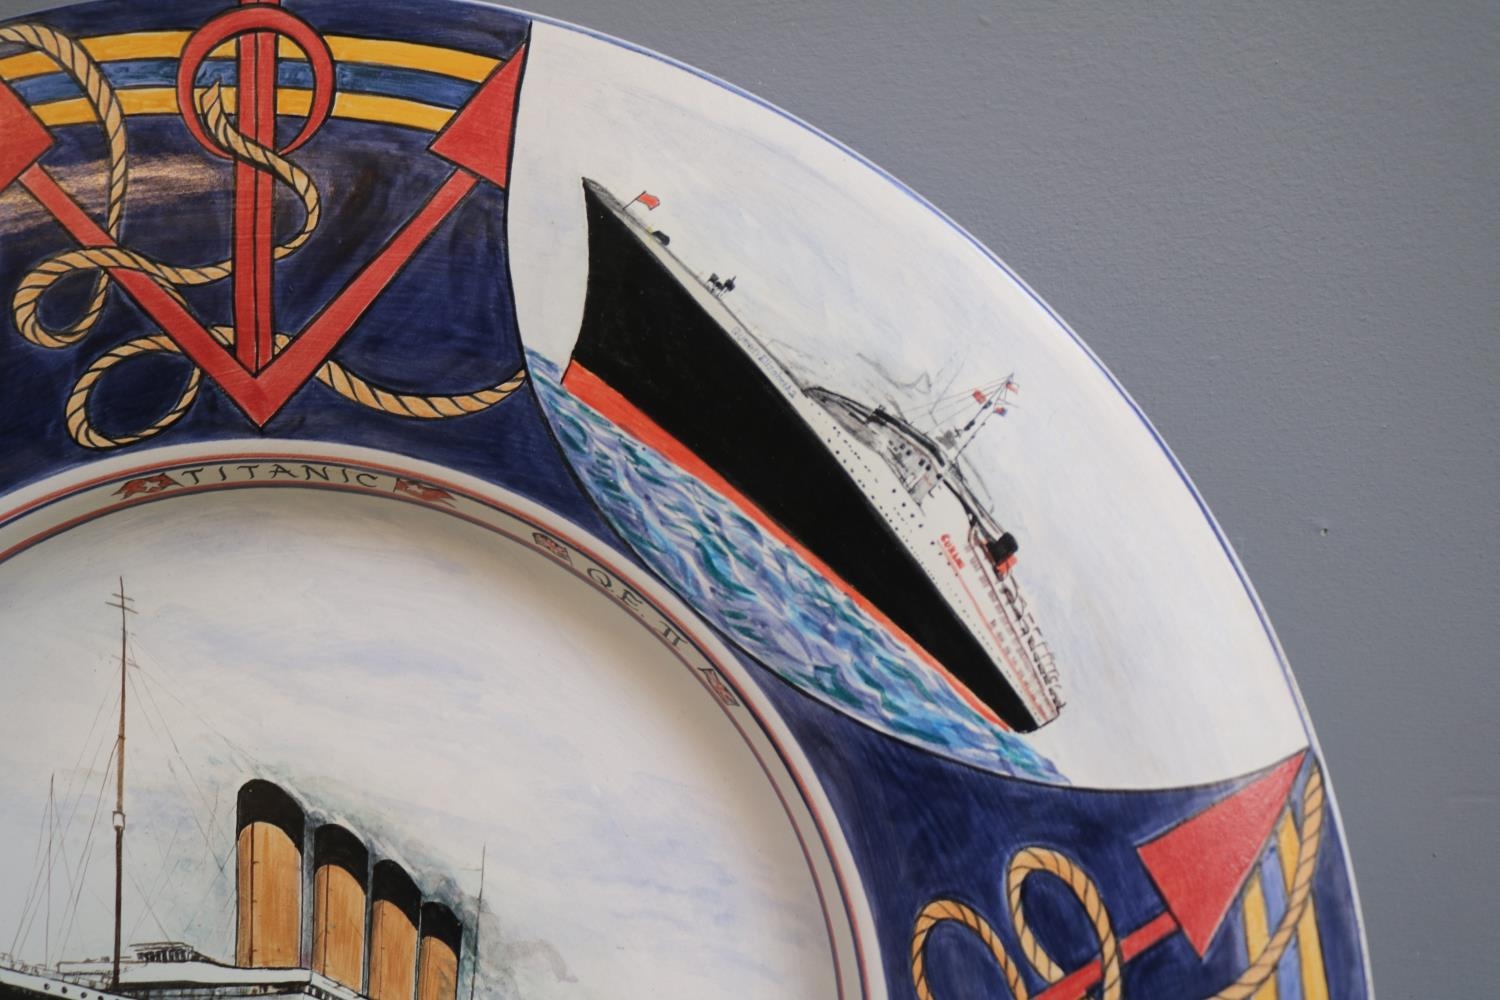 Poole Artist Studio Pottery 'Liner' dish 1 of 1 by Karen Brown dated 2004 to include Titanic, QE II - Image 4 of 7